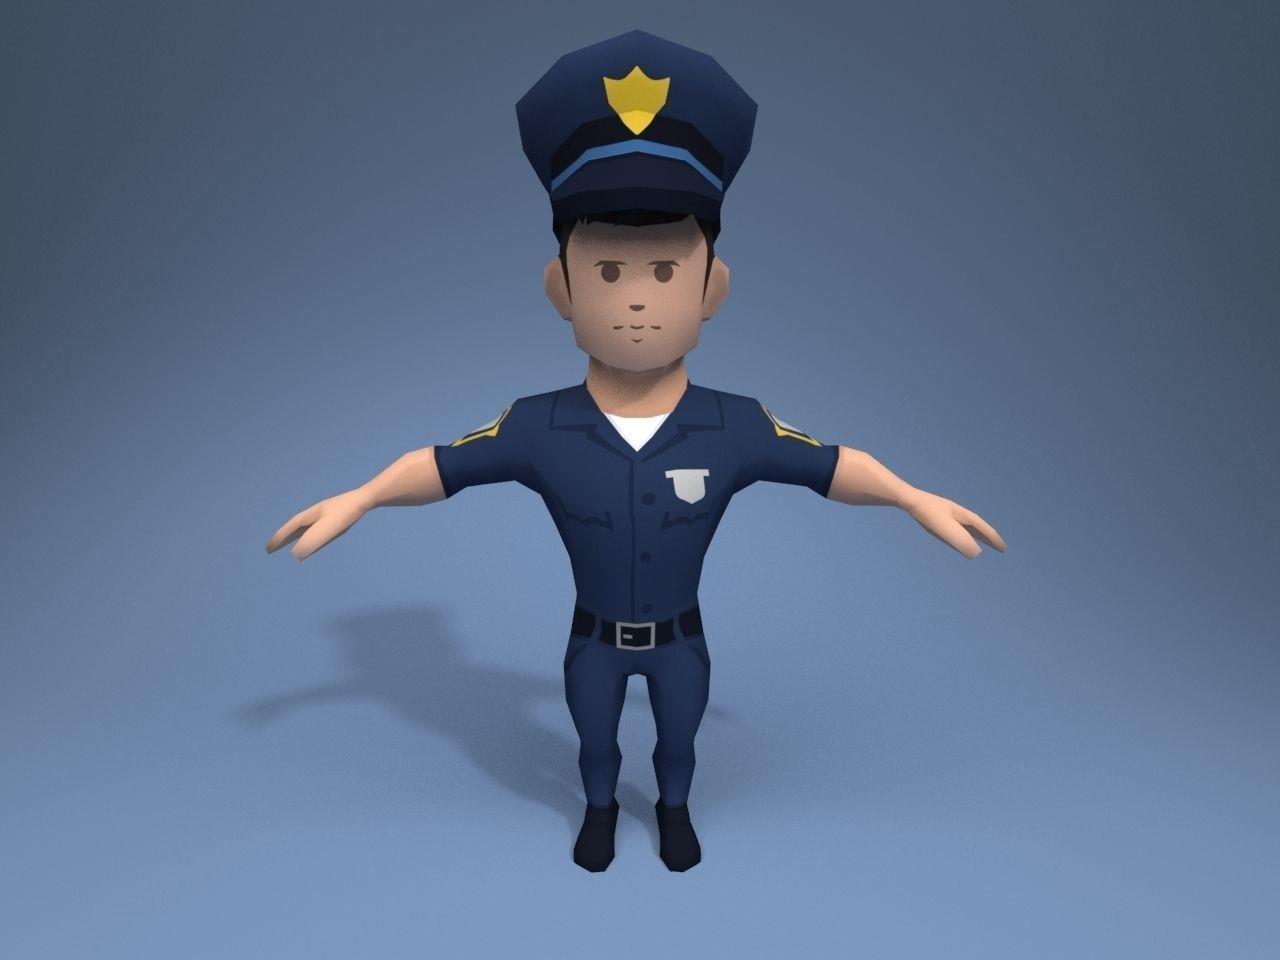 policeman-3d-model-low-poly-rigged-max-obj-fbx-unitypackage